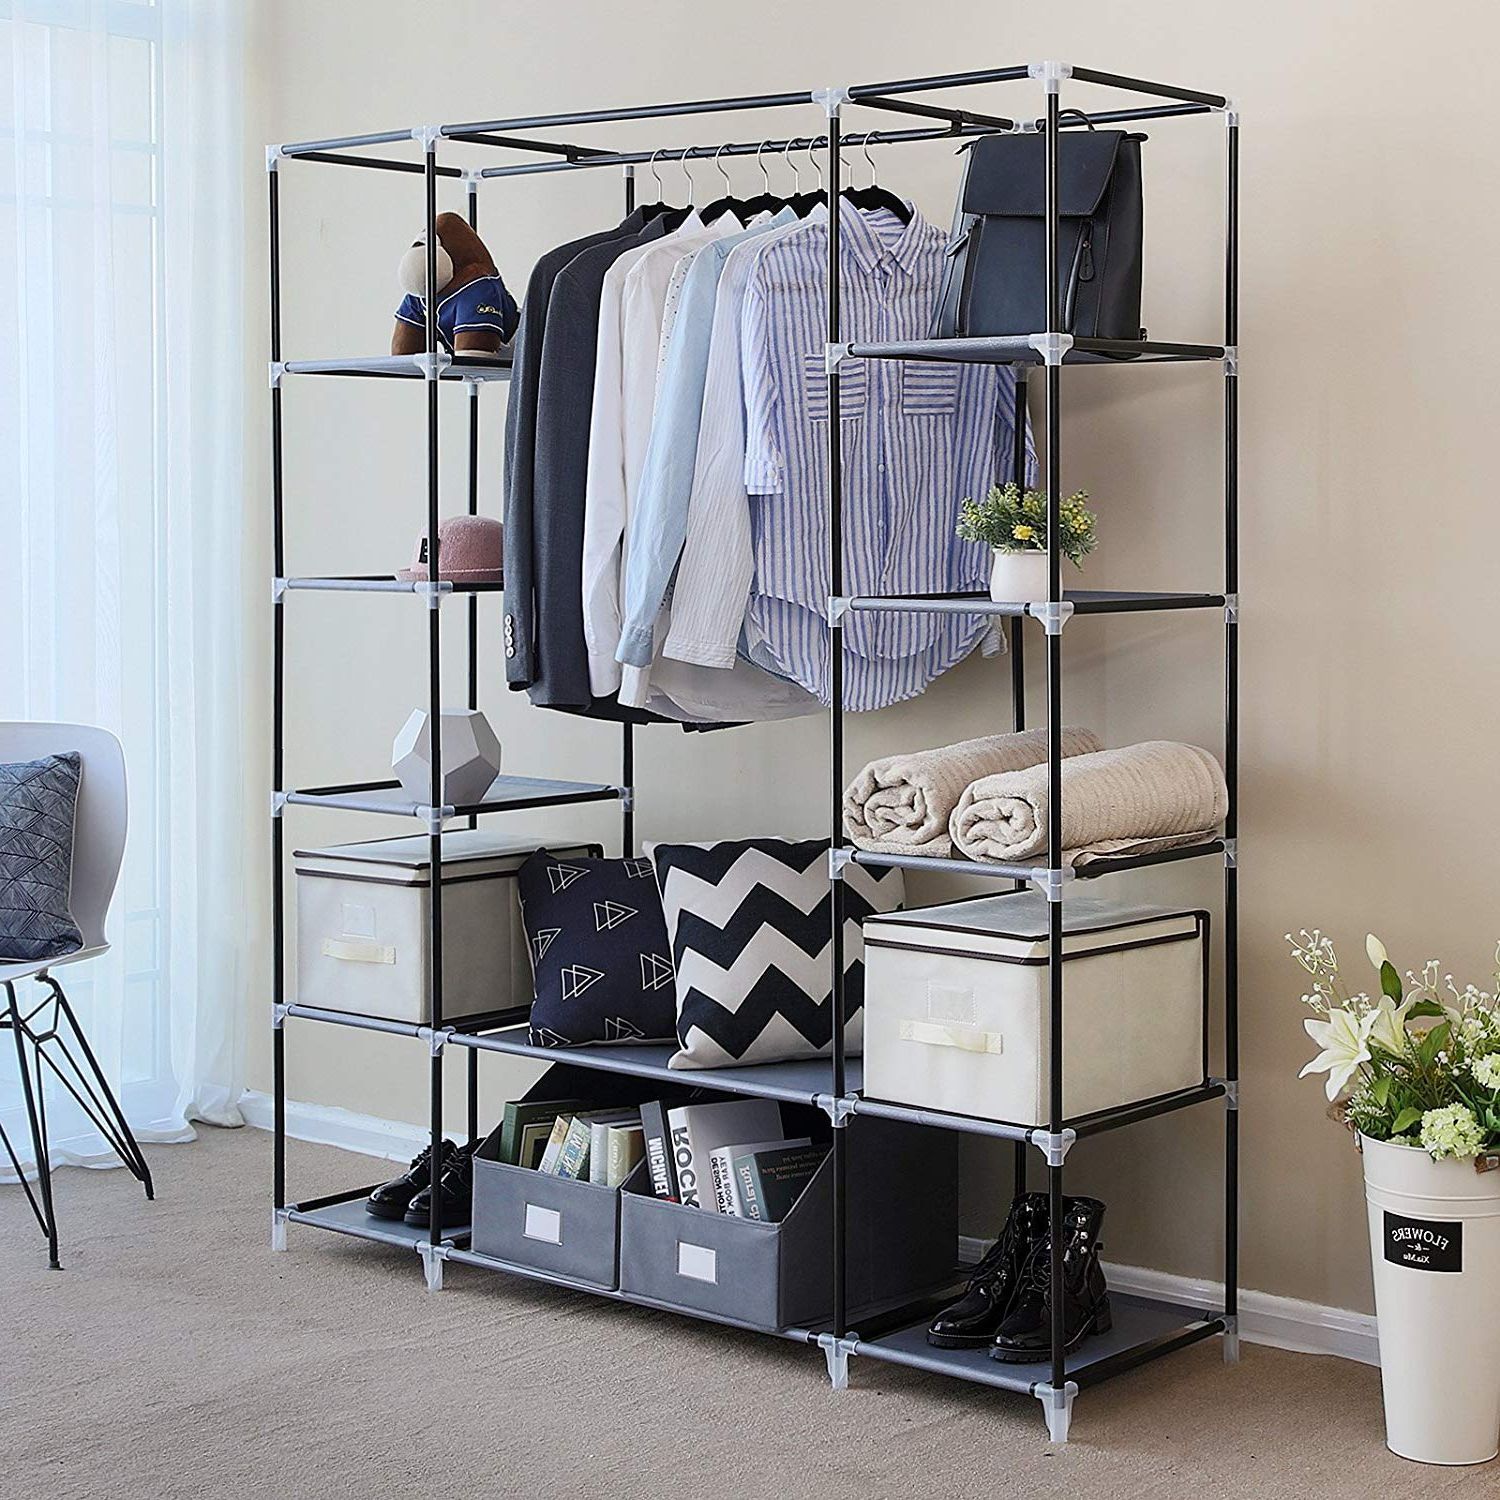 20 Portable Closet Choices For Easy Set Up And Cleaning | Storables With Regard To Wardrobes With Shelf Portable Closet (View 4 of 20)